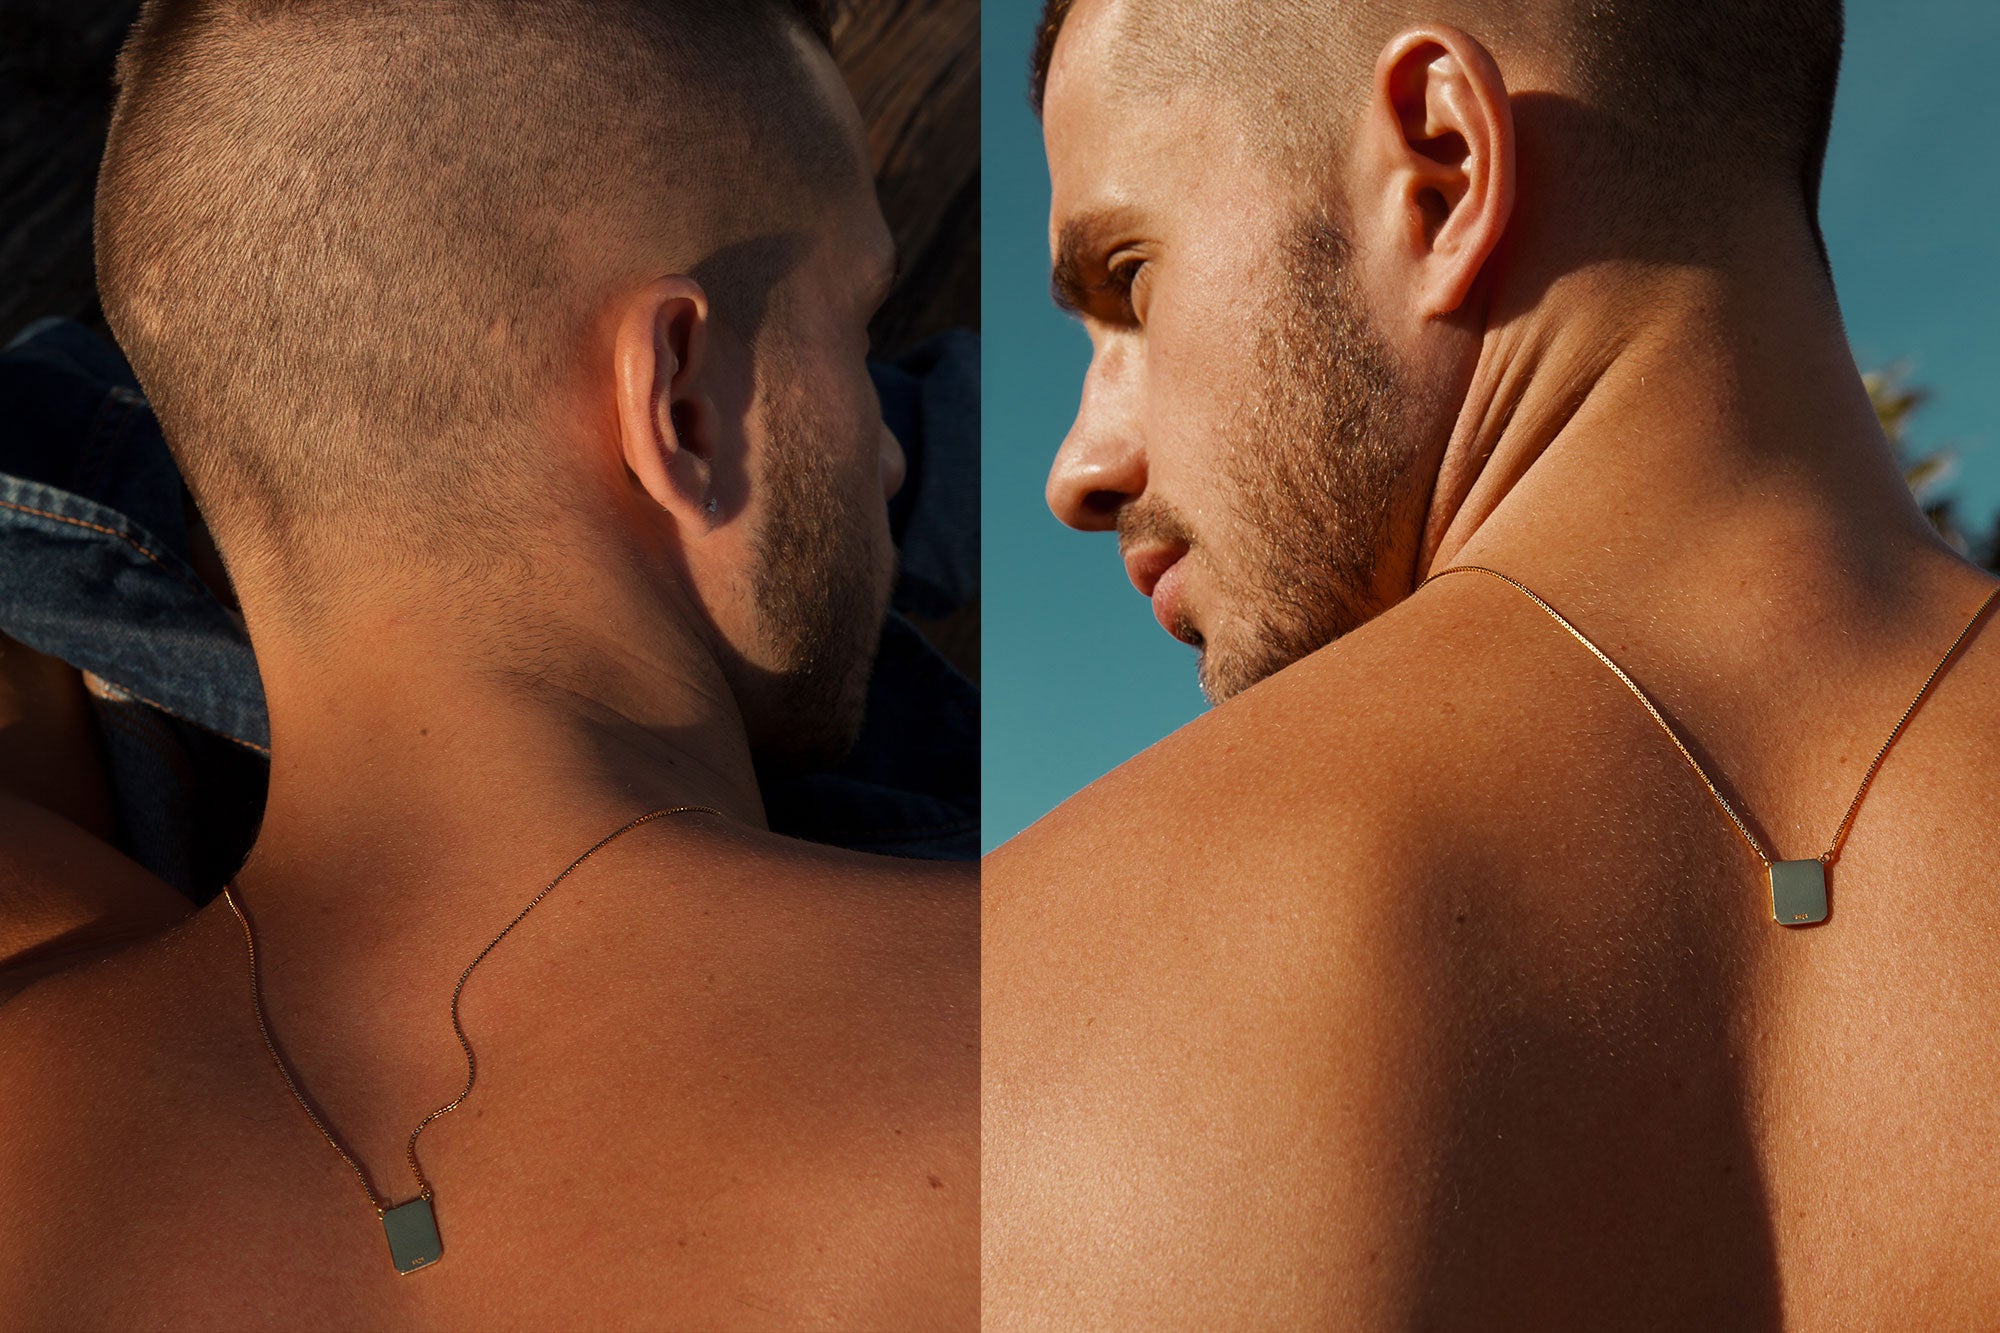 Scapular Necklace by anthony pecoraro for seven50 \\ Hot Summer Trend in 2018